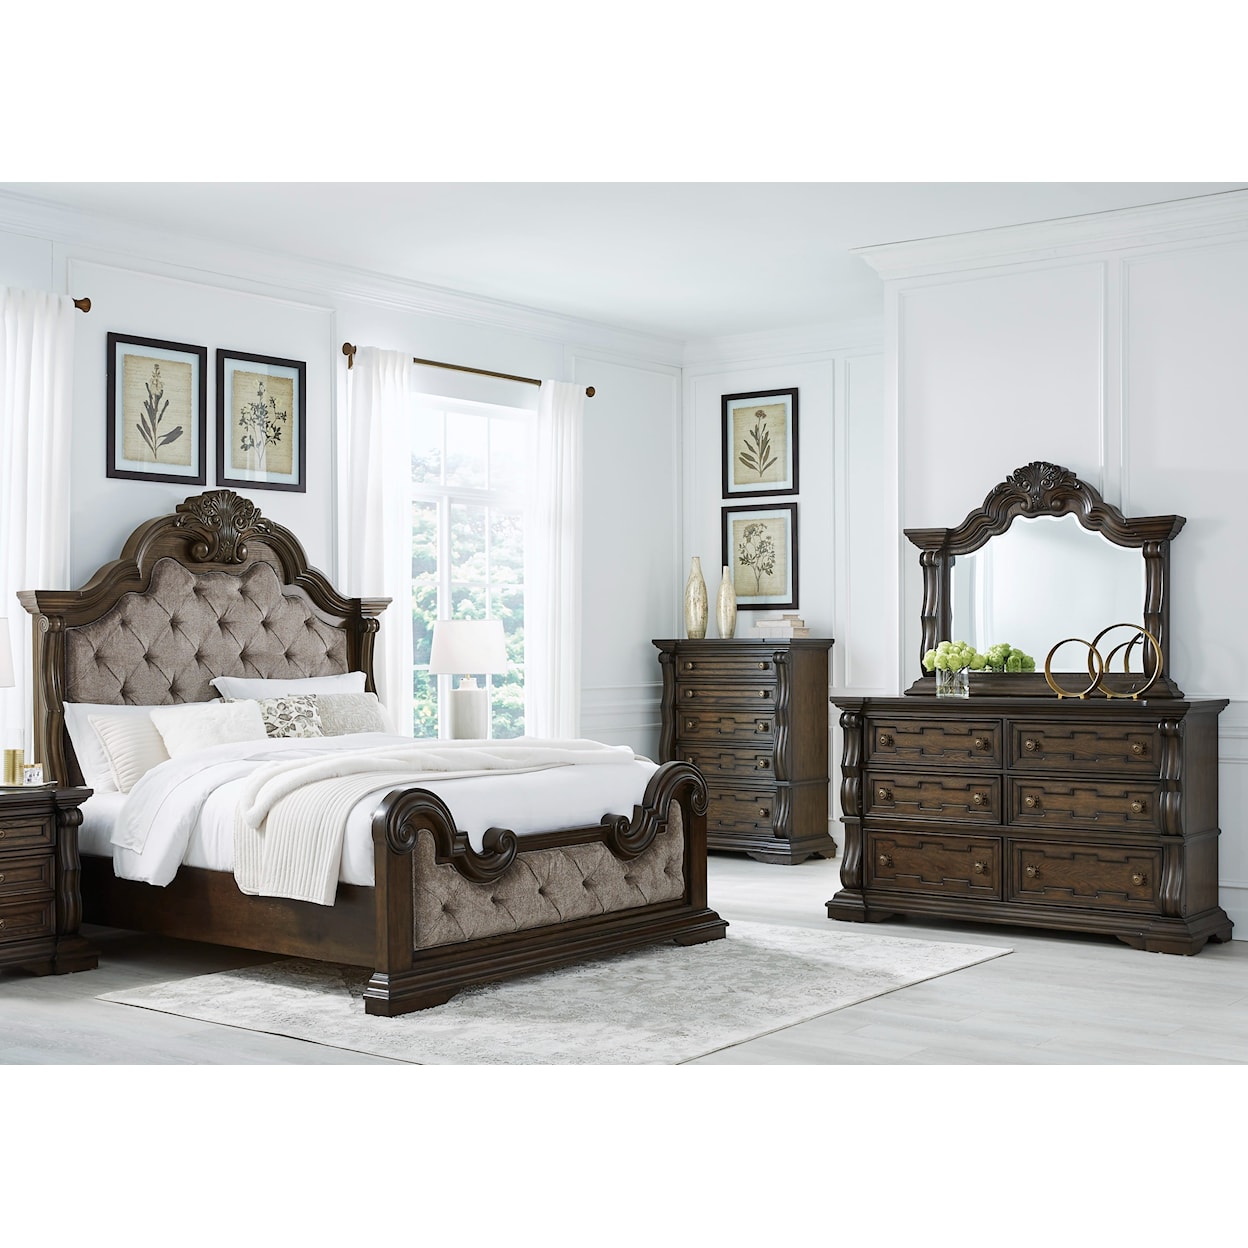 Ashley Furniture Signature Design Maylee Queen Bedroom Group